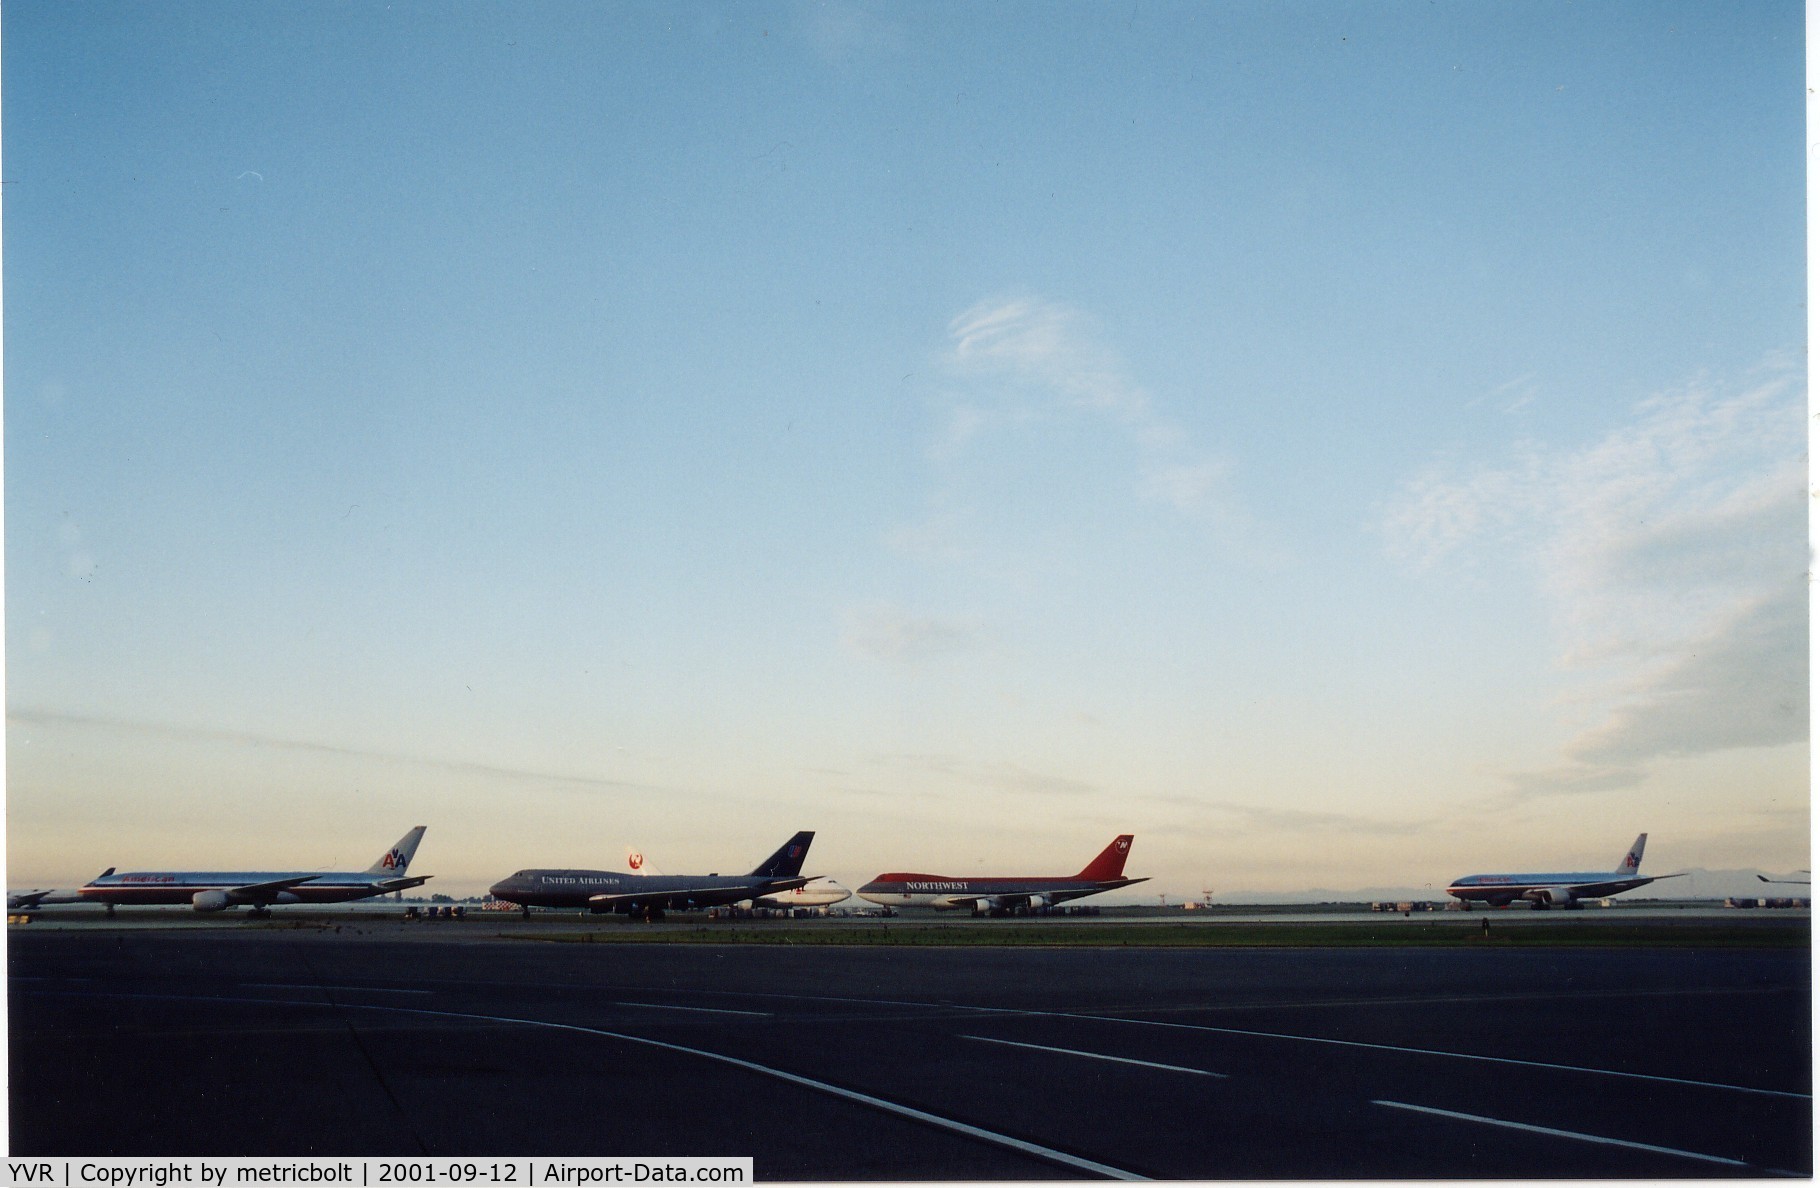 Vancouver International Airport, Vancouver, British Columbia Canada (YVR) - Aircraft diverted to YVR Sep/11/2001